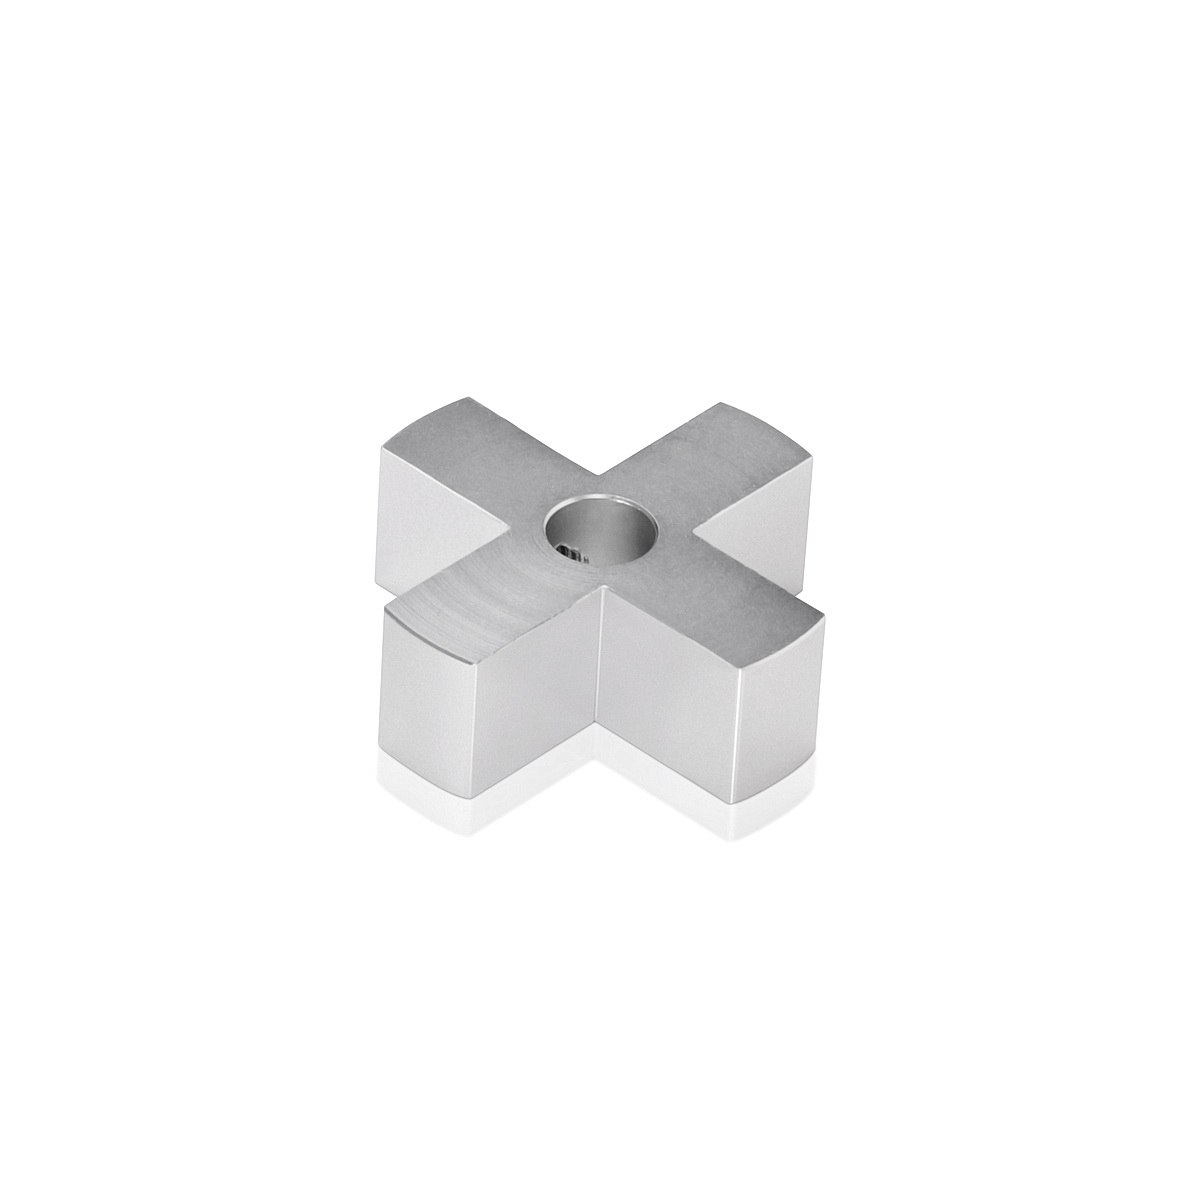 4-Way Standoffs Hub, Diameter: 1 1/2'', Thickness: 1/2'', Clear Anodized Aluminum [Required Material Hole Size: 7/16'']